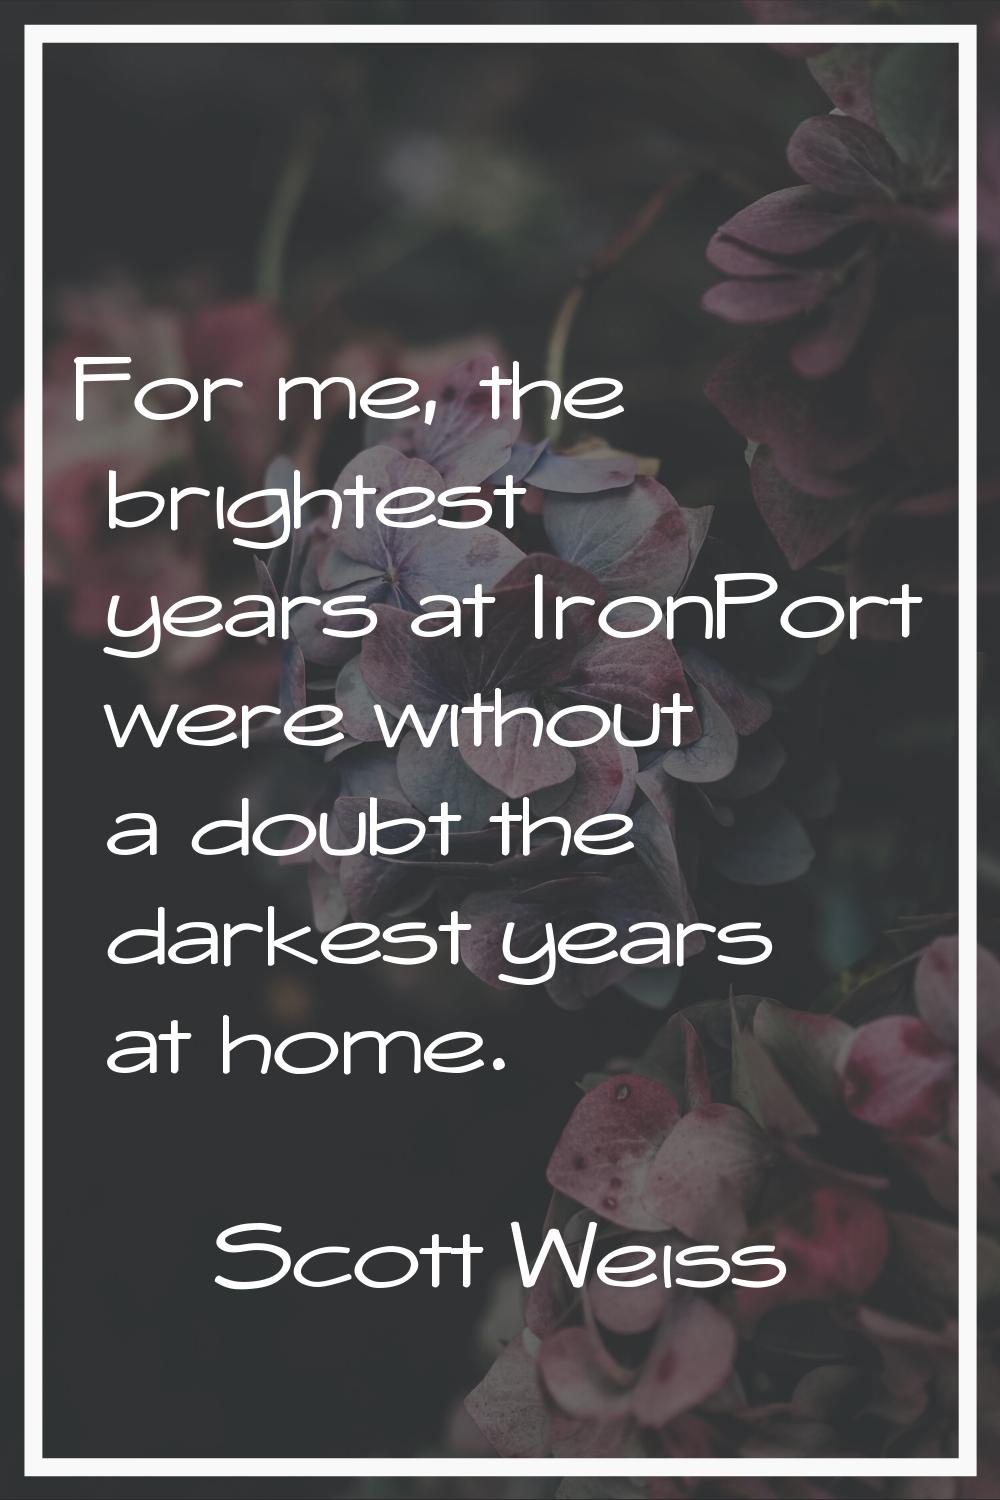 For me, the brightest years at IronPort were without a doubt the darkest years at home.